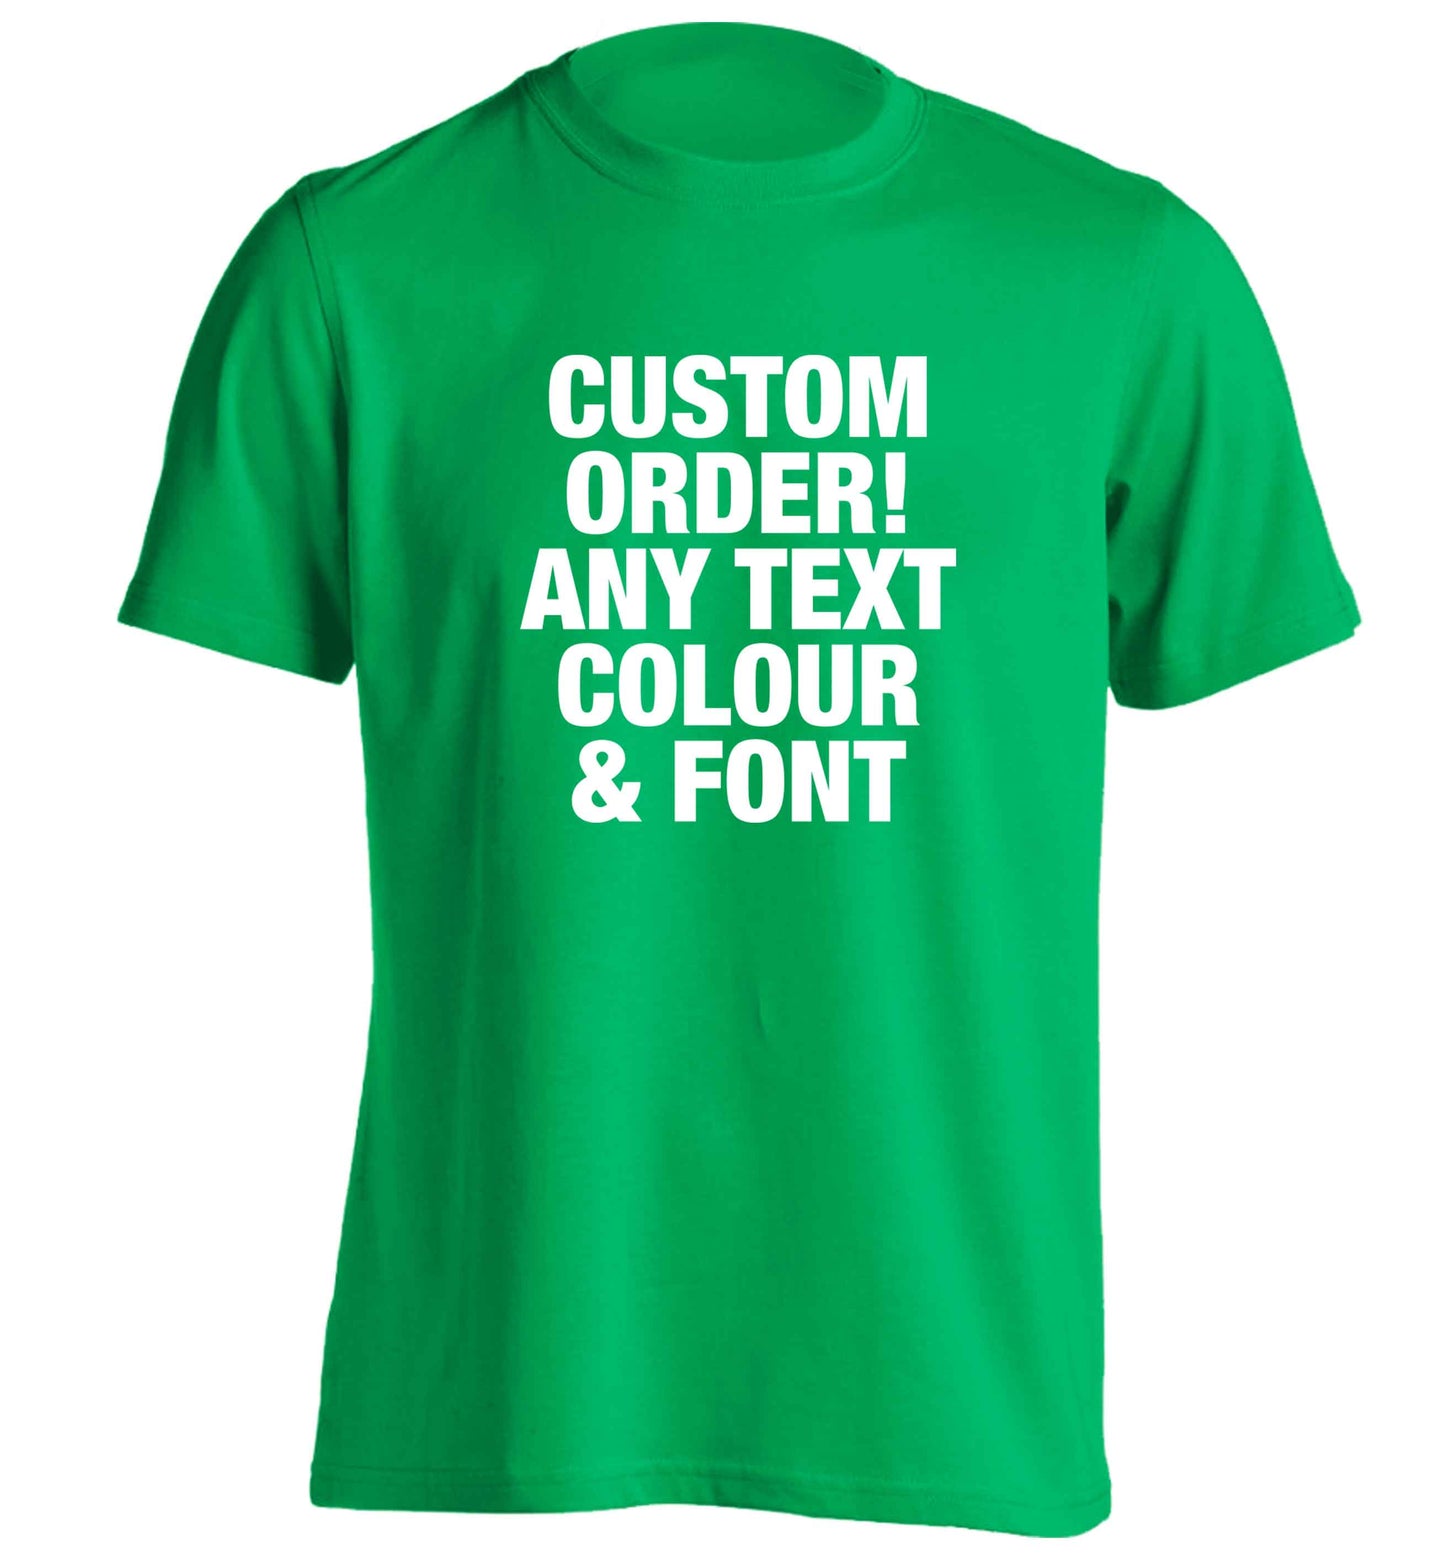 Custom order any text colour and font adults unisex green Tshirt 2XL